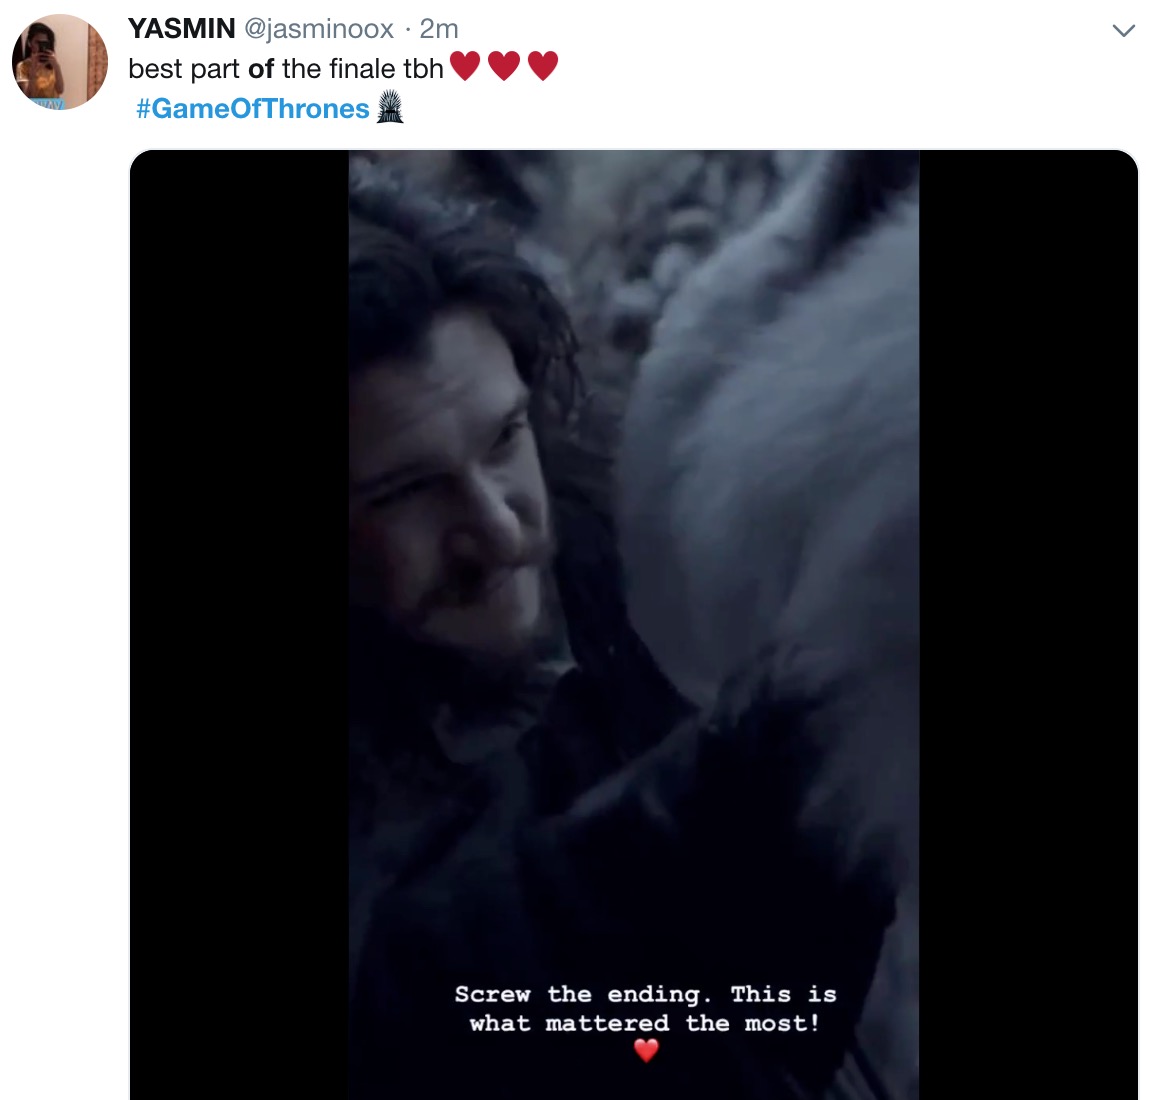 game of thrones final episode meme - photo caption - Yasmin 2m best part of the finale tbh Screw the ending. This is what mattered the most!